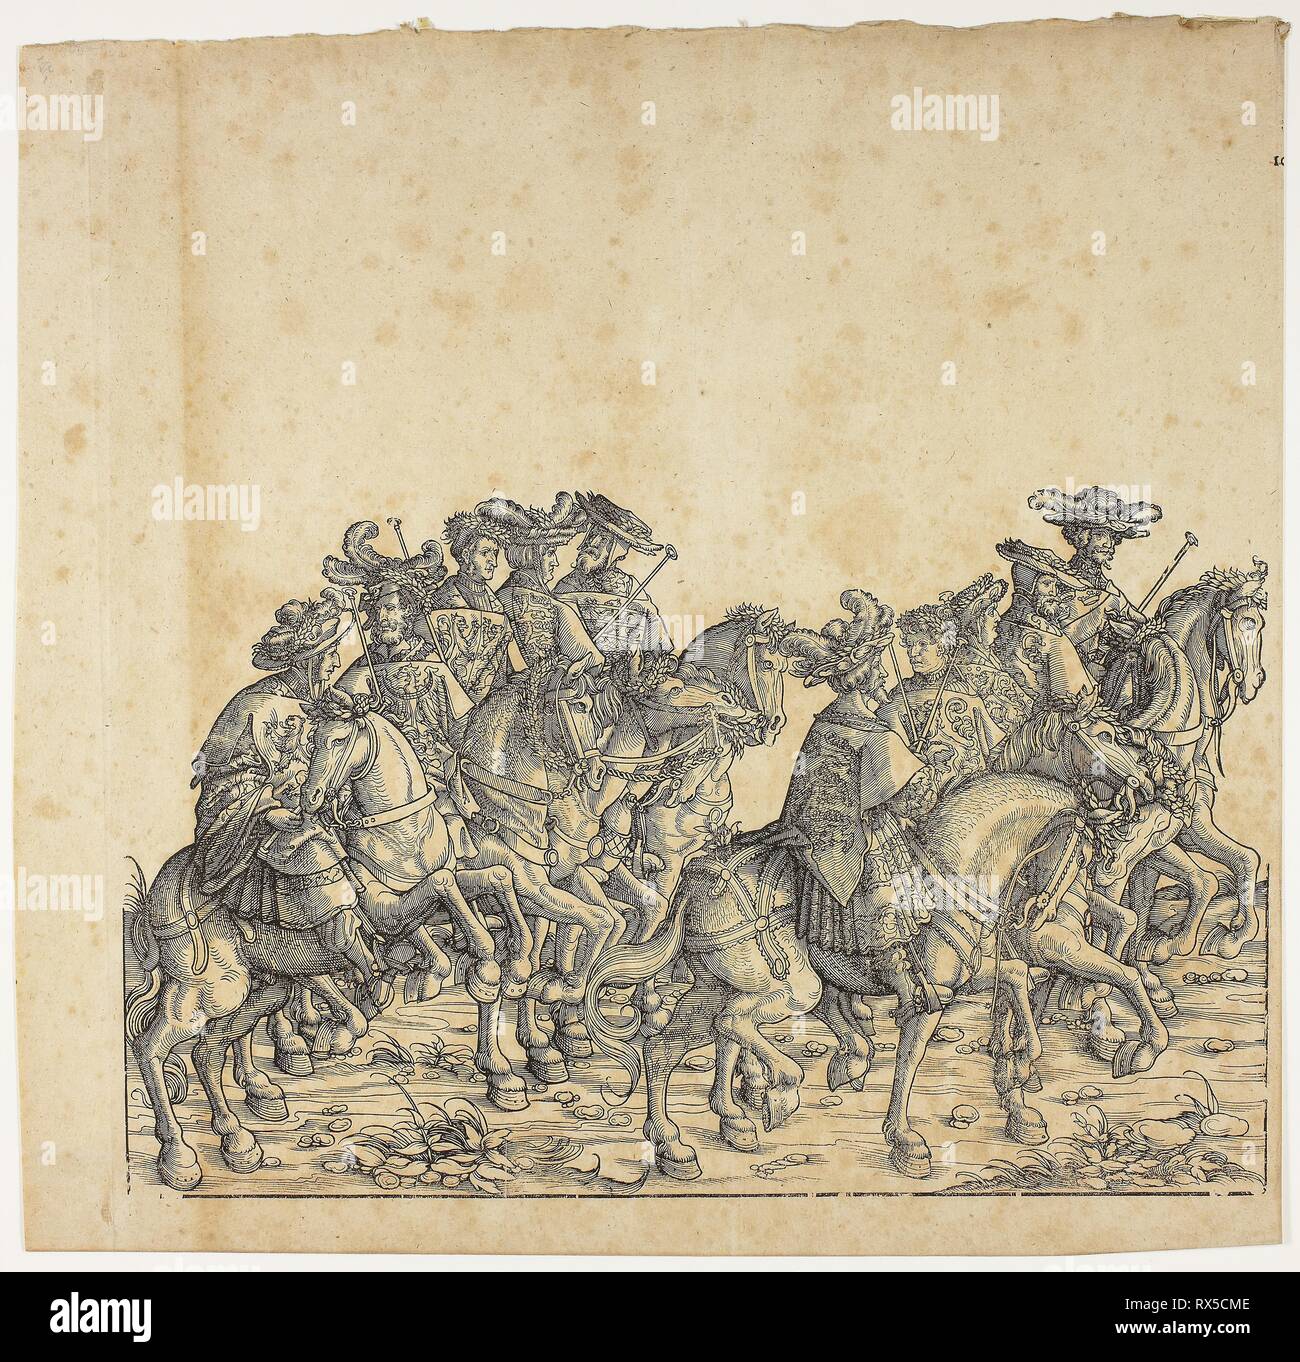 Triumph of Maximilian. Hans Burgkmair, the elder; German, 1473-1531. Date: 1493-1531. Dimensions: 430 x 475 mm (unfolded). Woodcut on paper. Origin: Germany. Museum: The Chicago Art Institute. Stock Photo